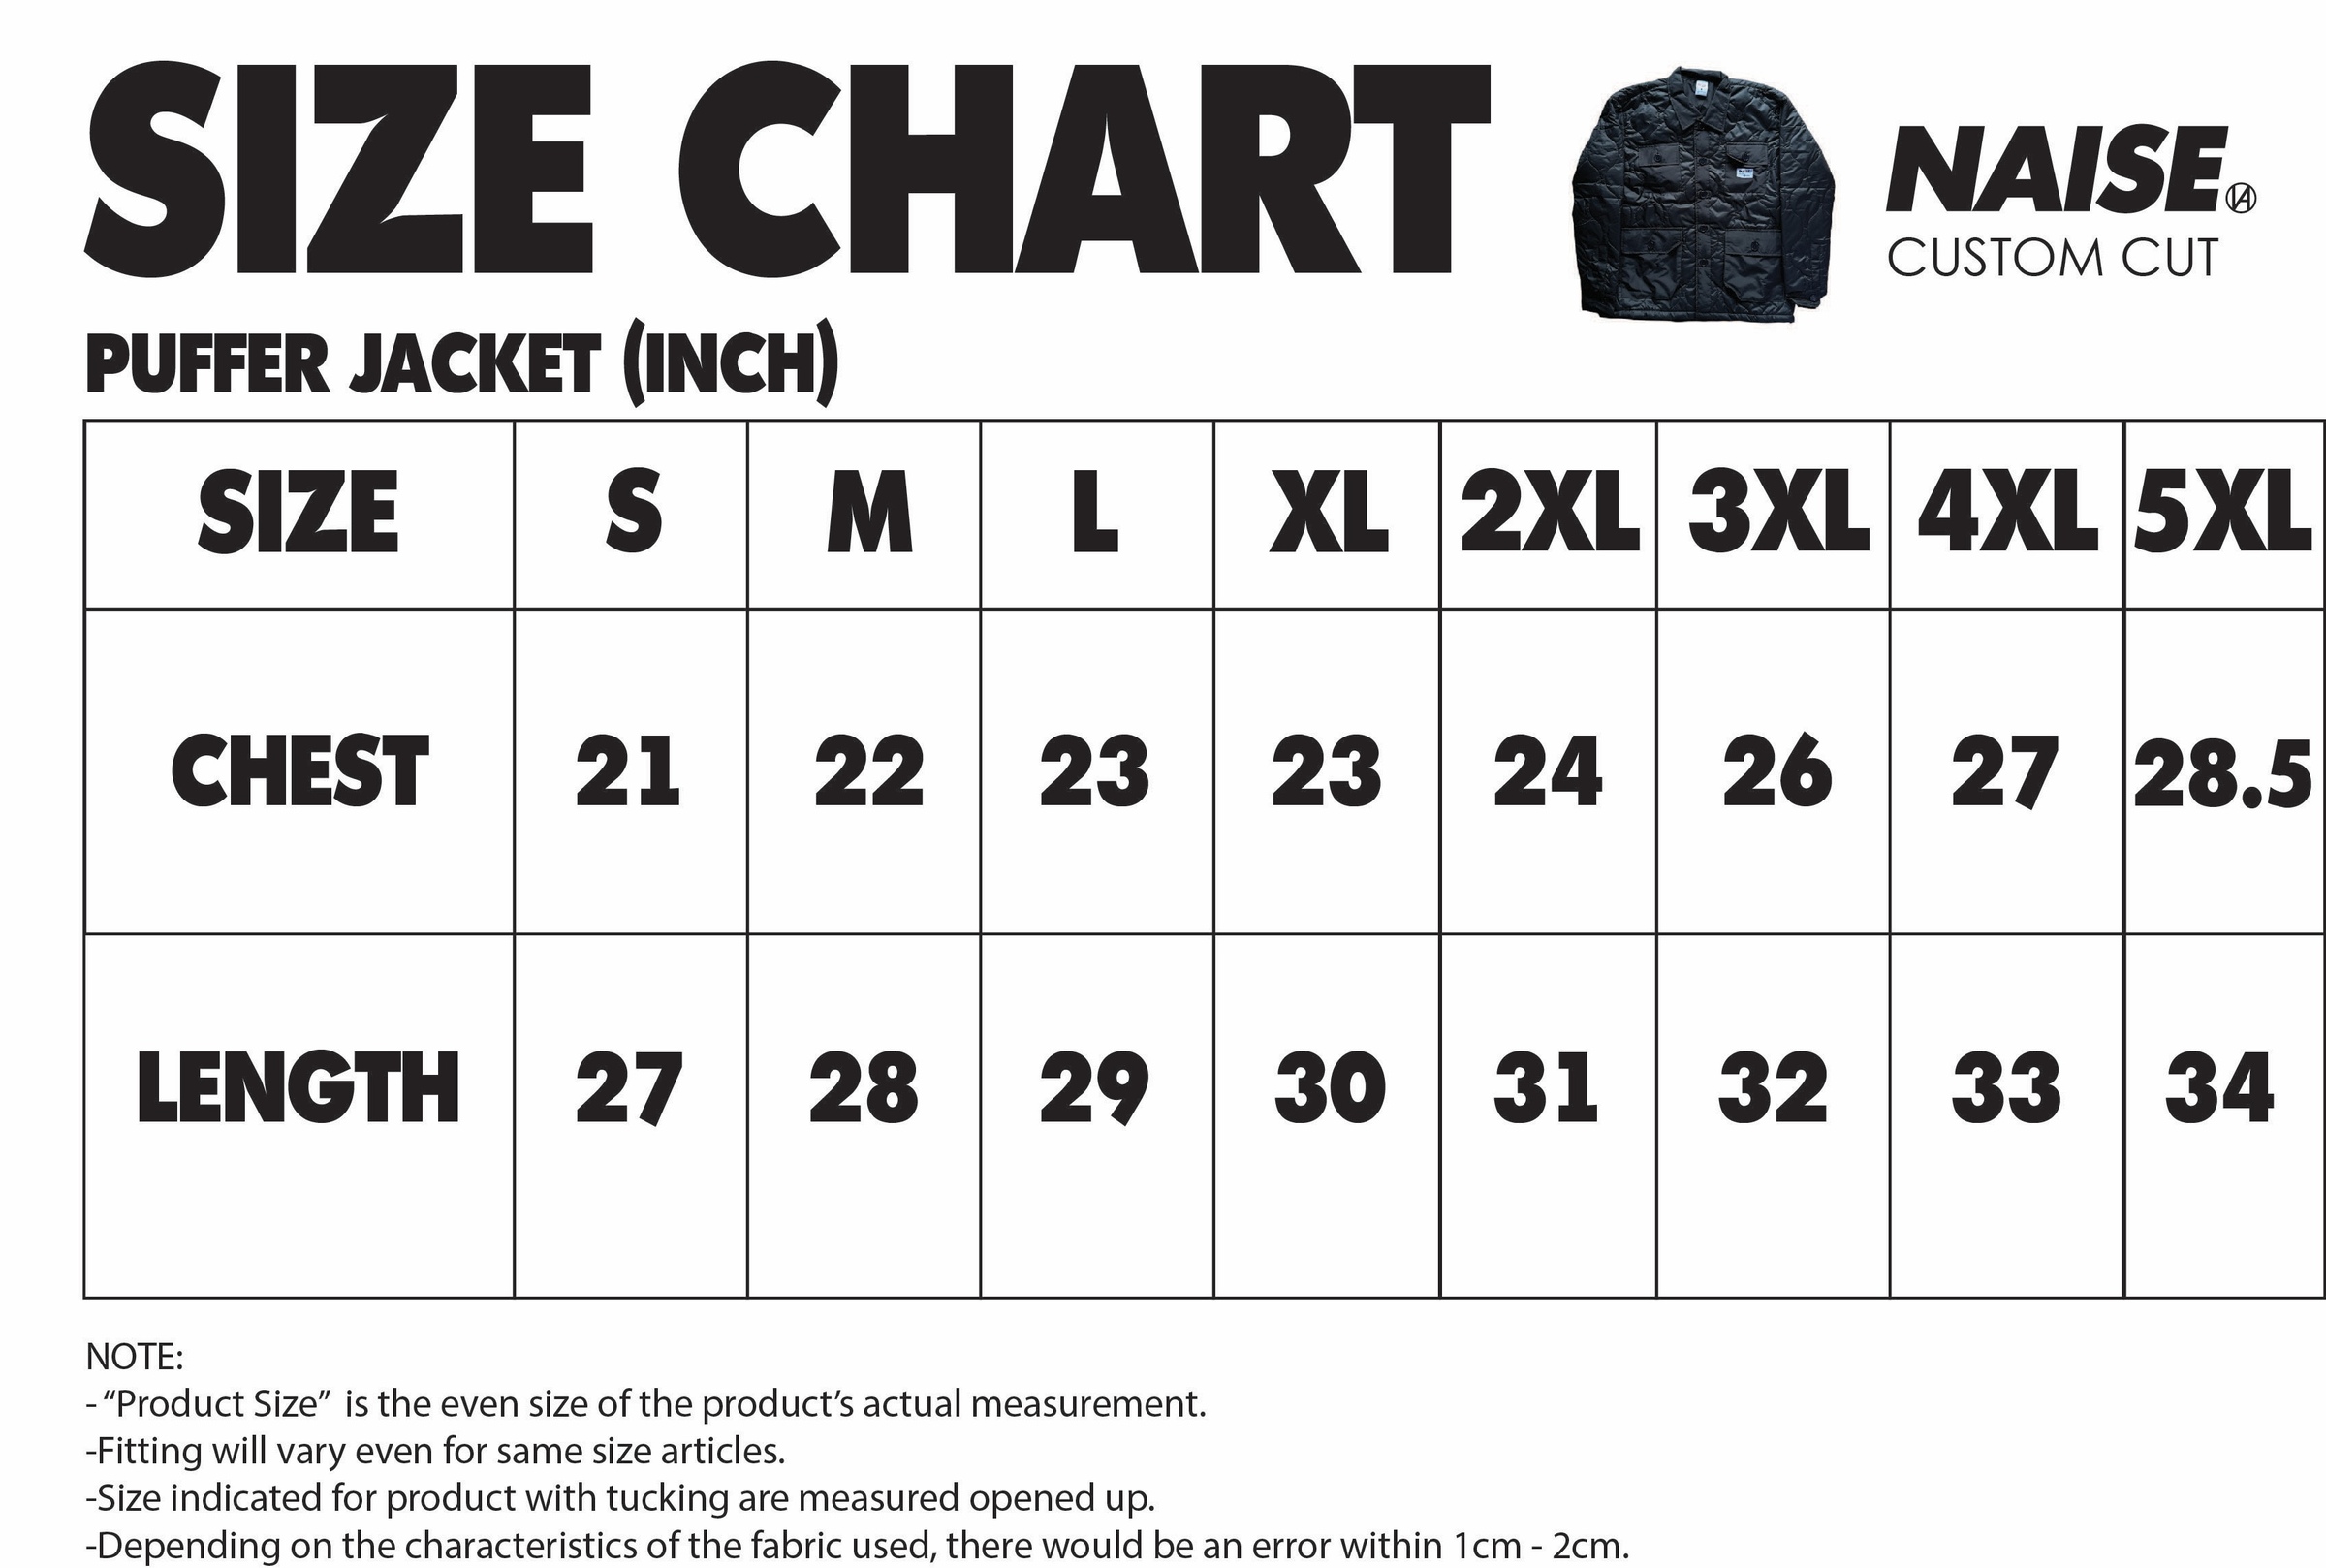 SIZE CHART PUFFER JACKET 2024 NOTE INCLUDED